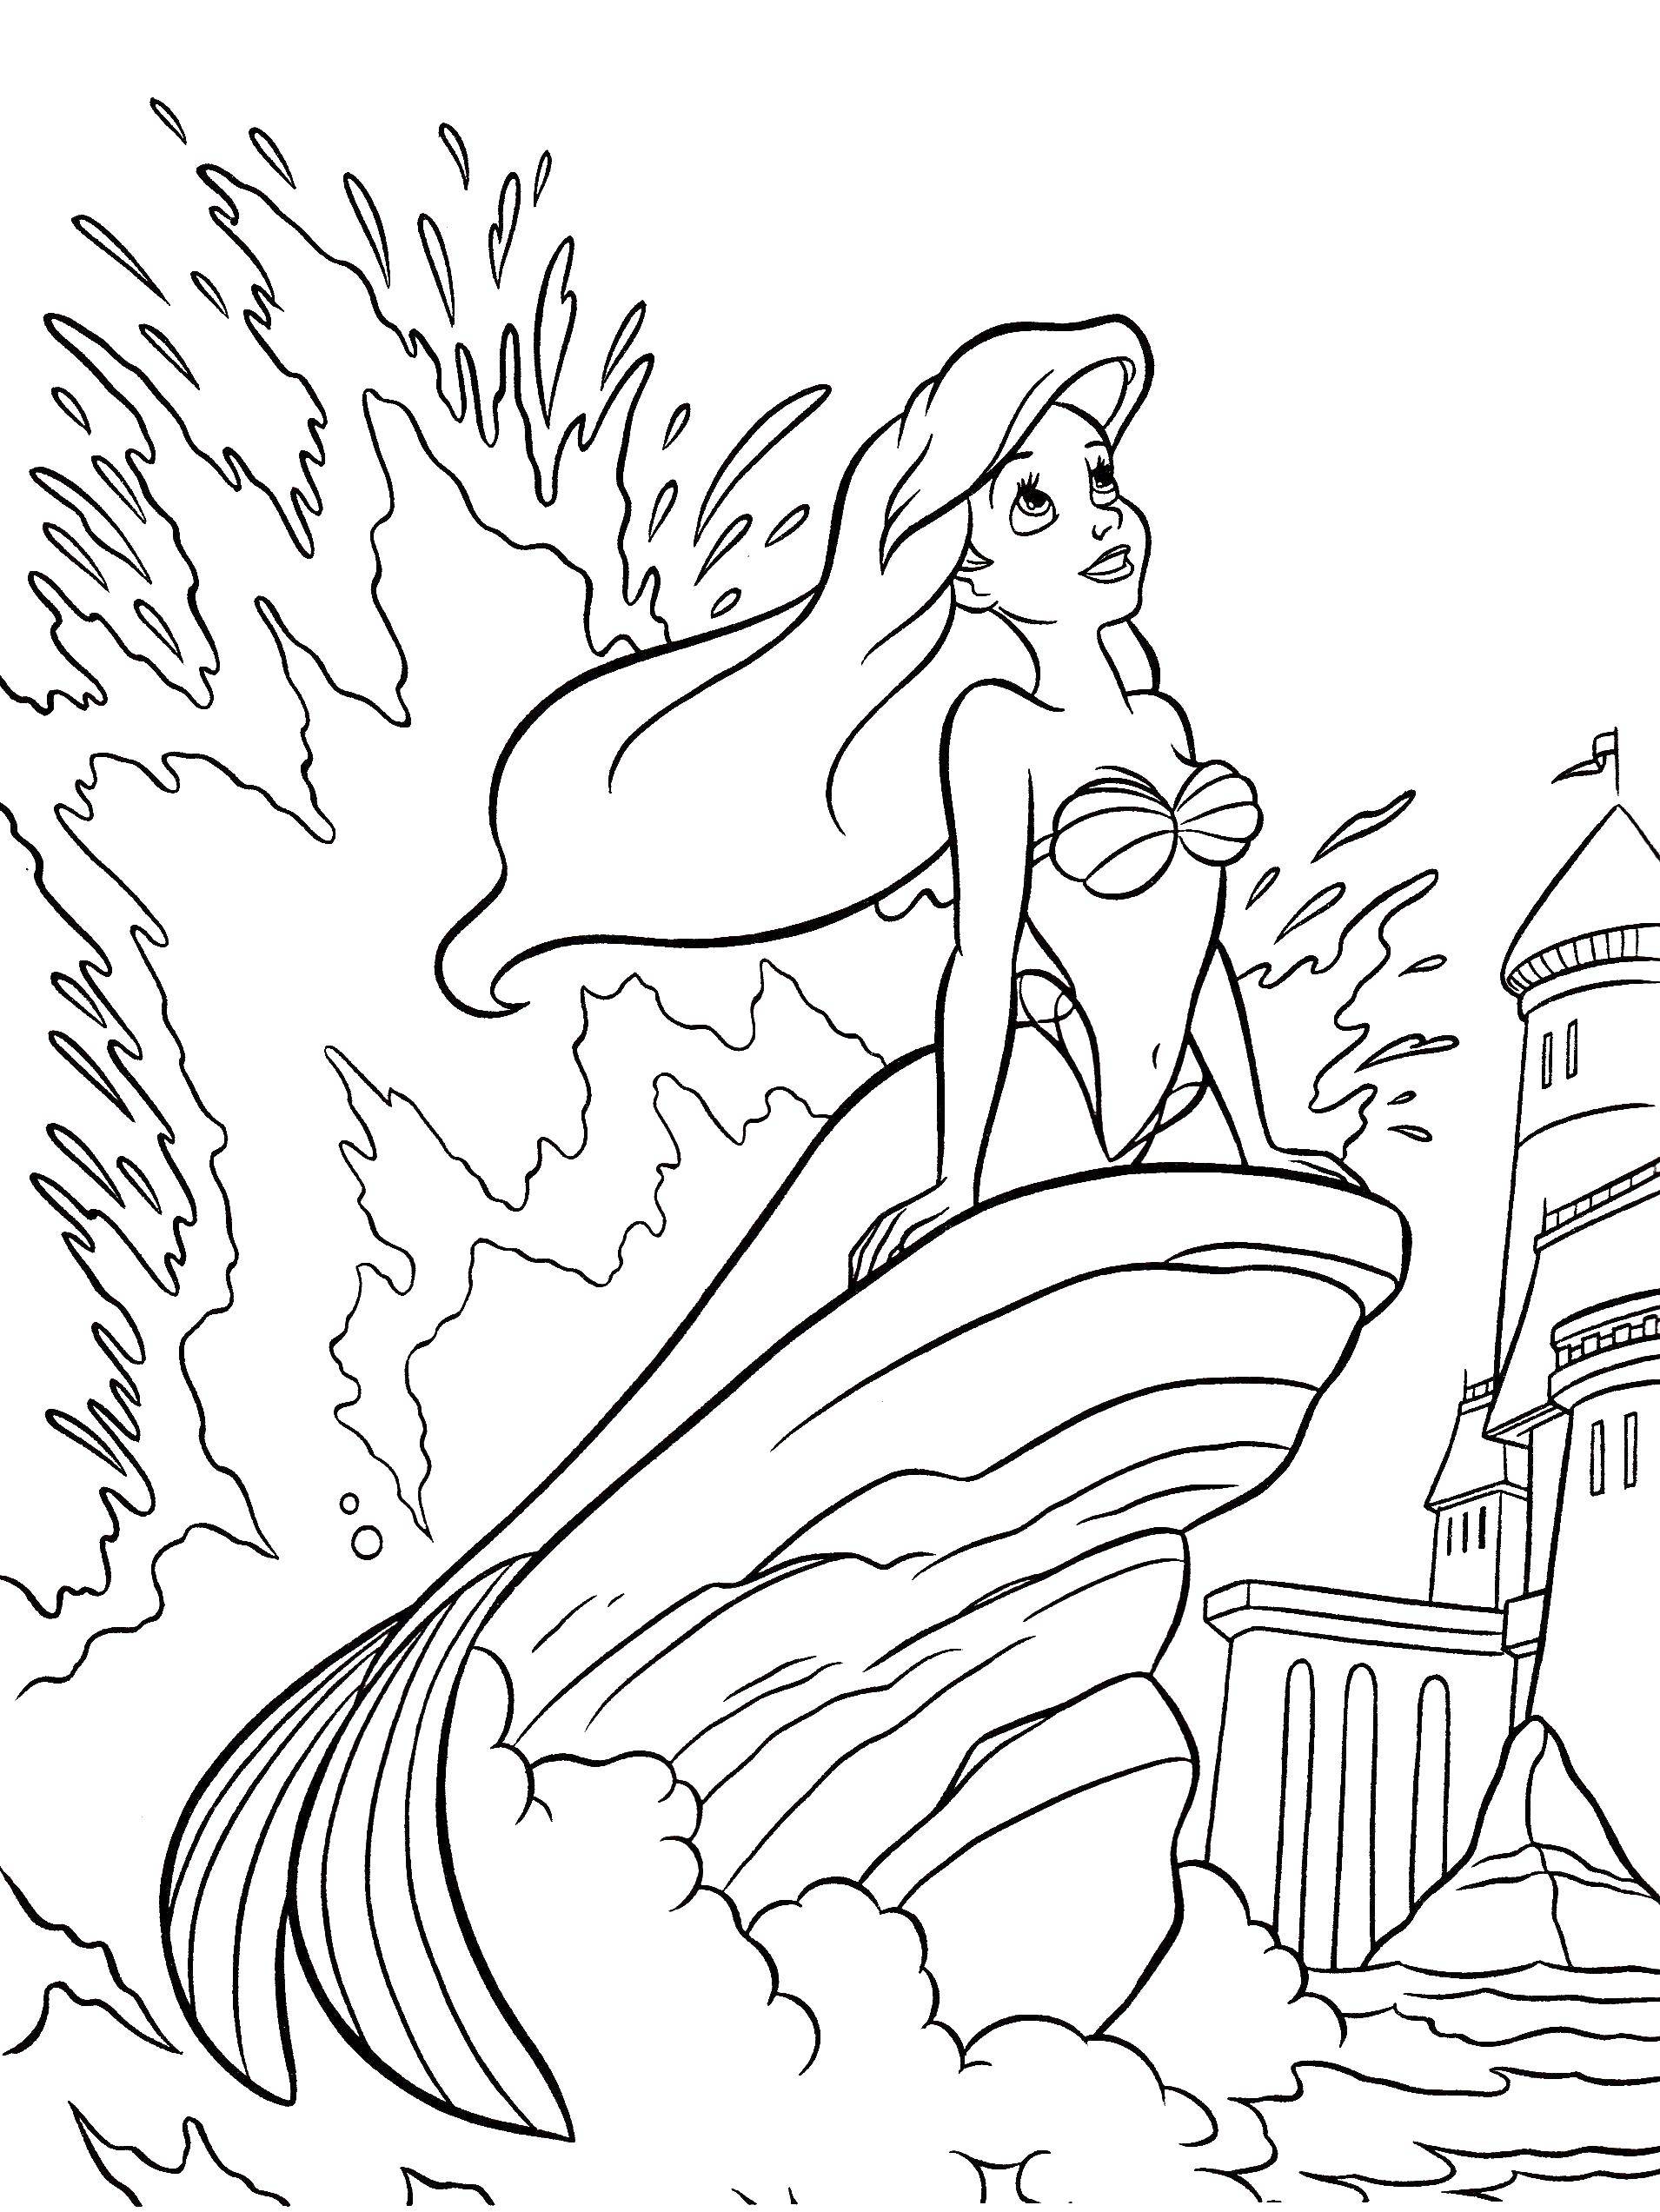 Coloring Ariel on the rock. Category Disney cartoons. Tags:  Disney, the little mermaid, Ariel.